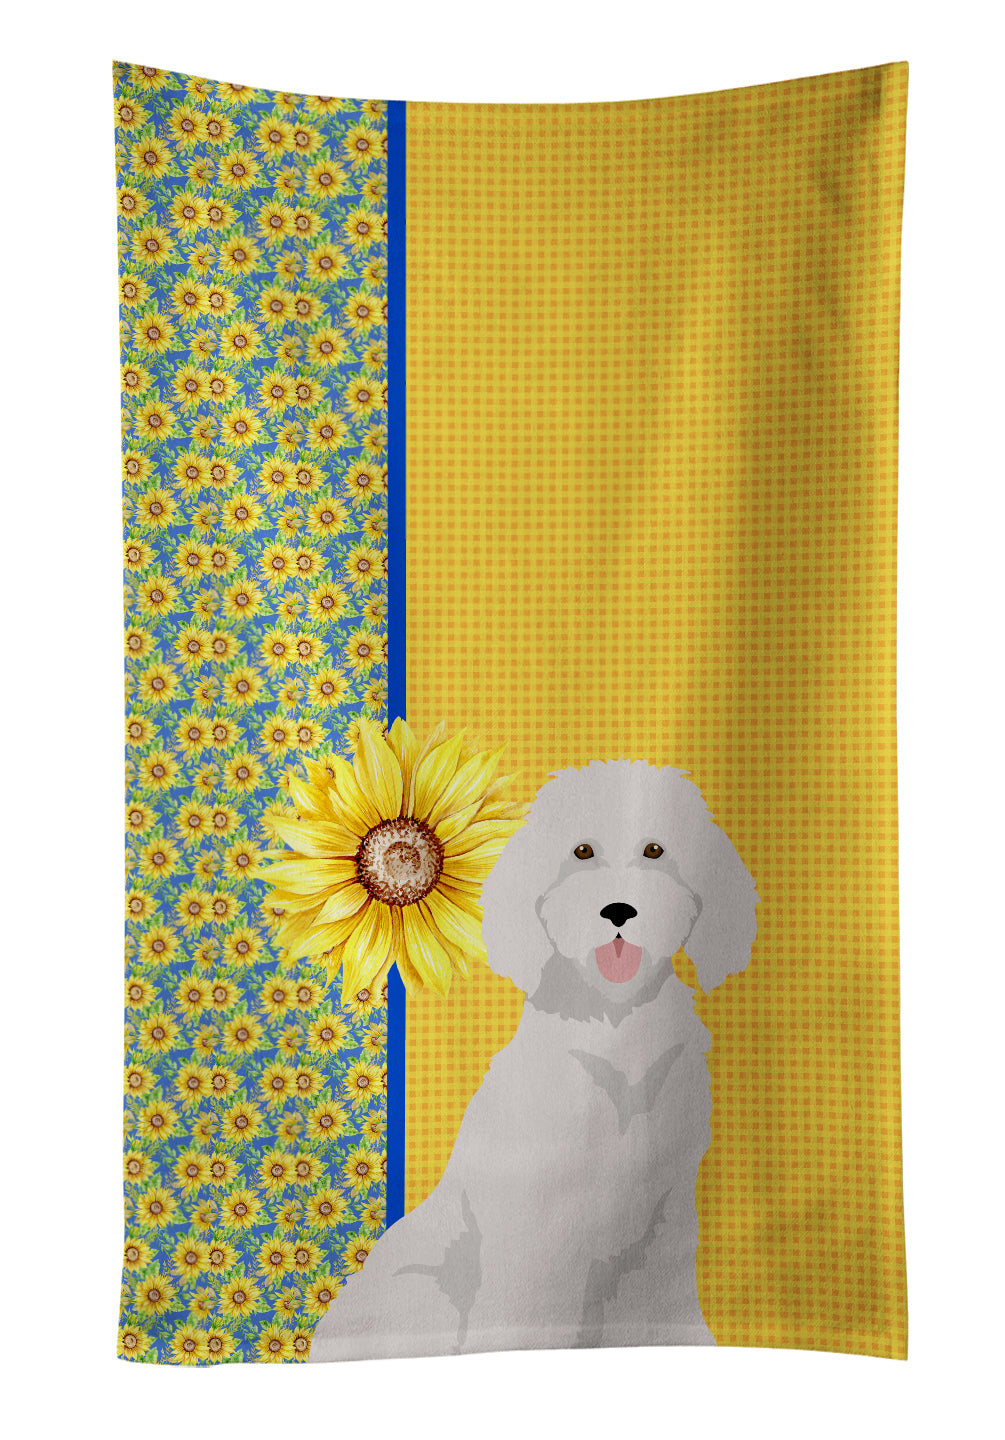 Buy this Summer Sunflowers Standard White Poodle Kitchen Towel